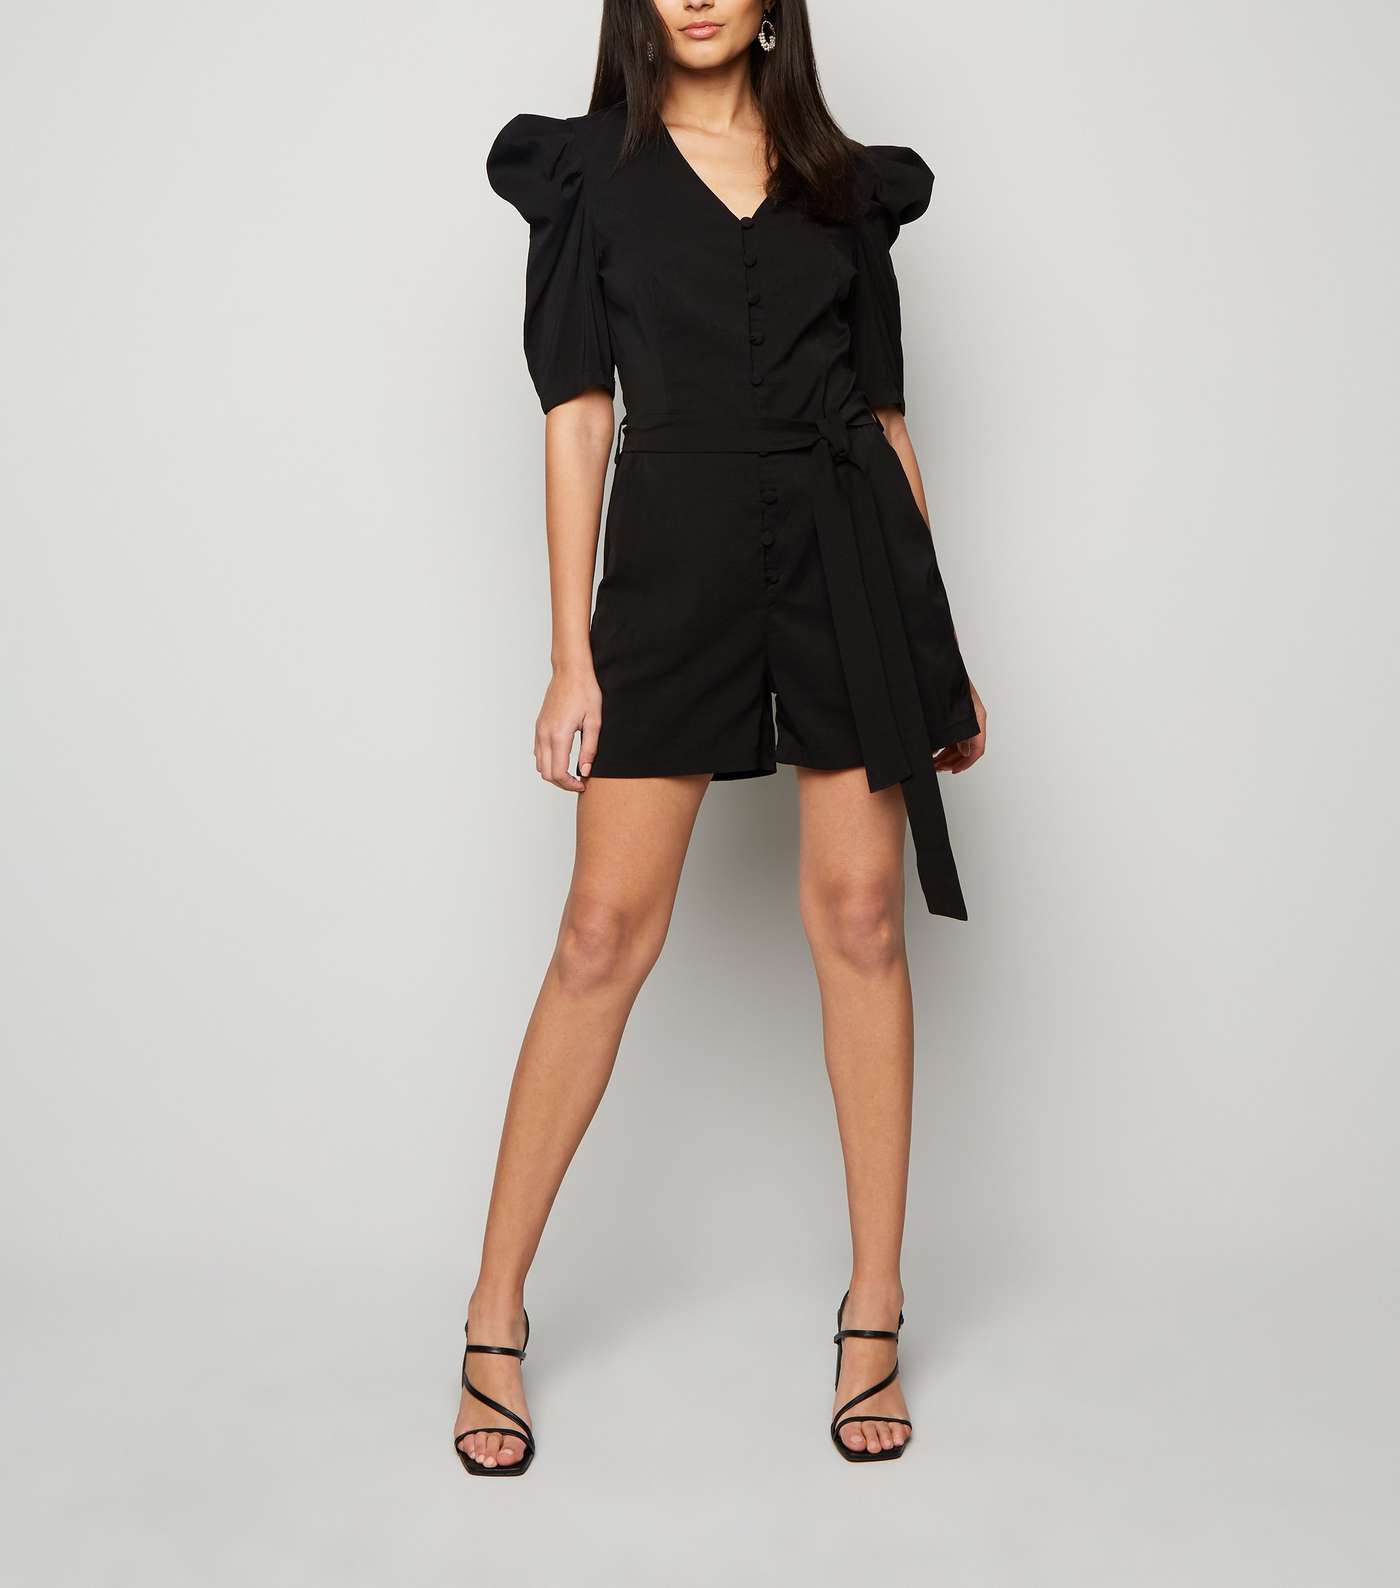 Pink Vanilla Black Button Front Playsuit Image 2